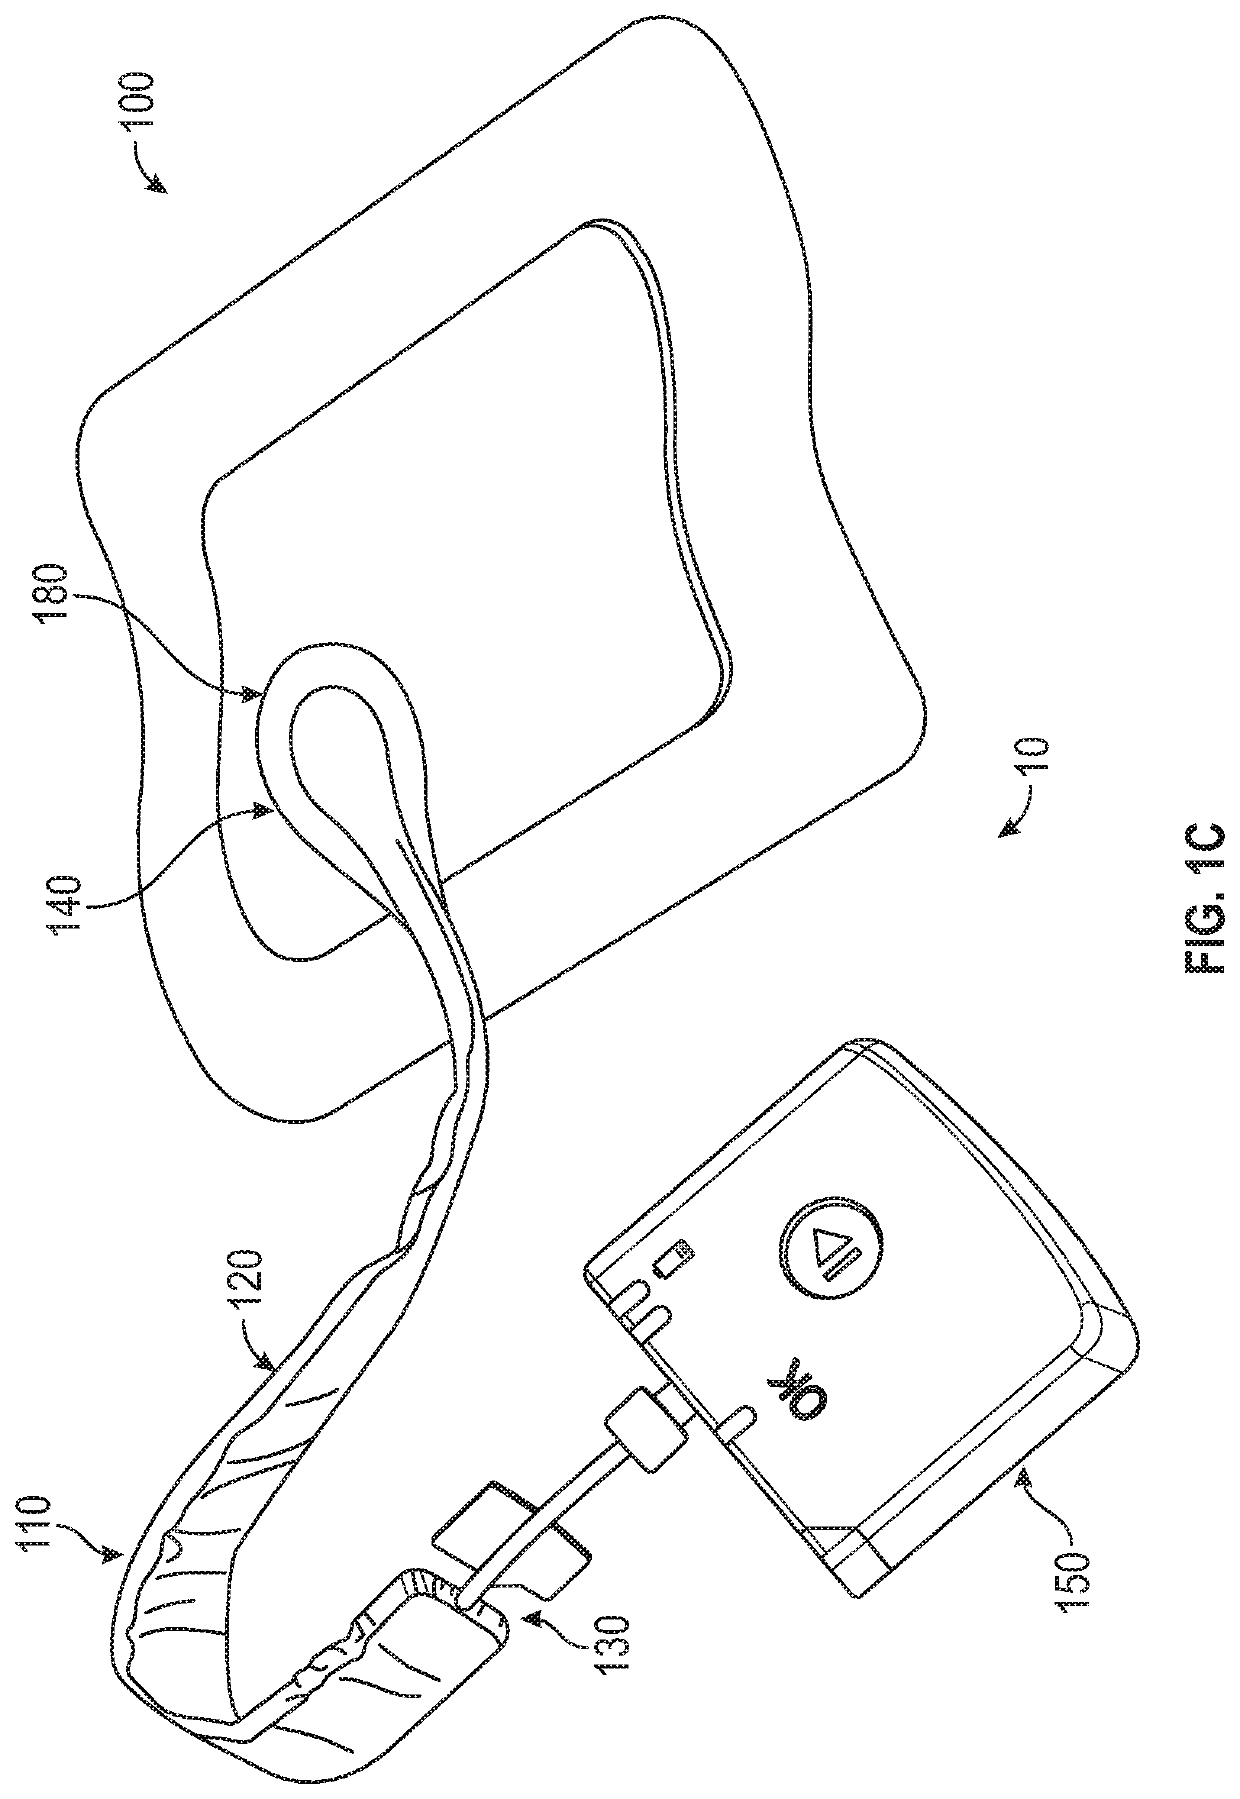 Sensor positioning and optical sensing for sensor enabled wound therapy dressings and systems